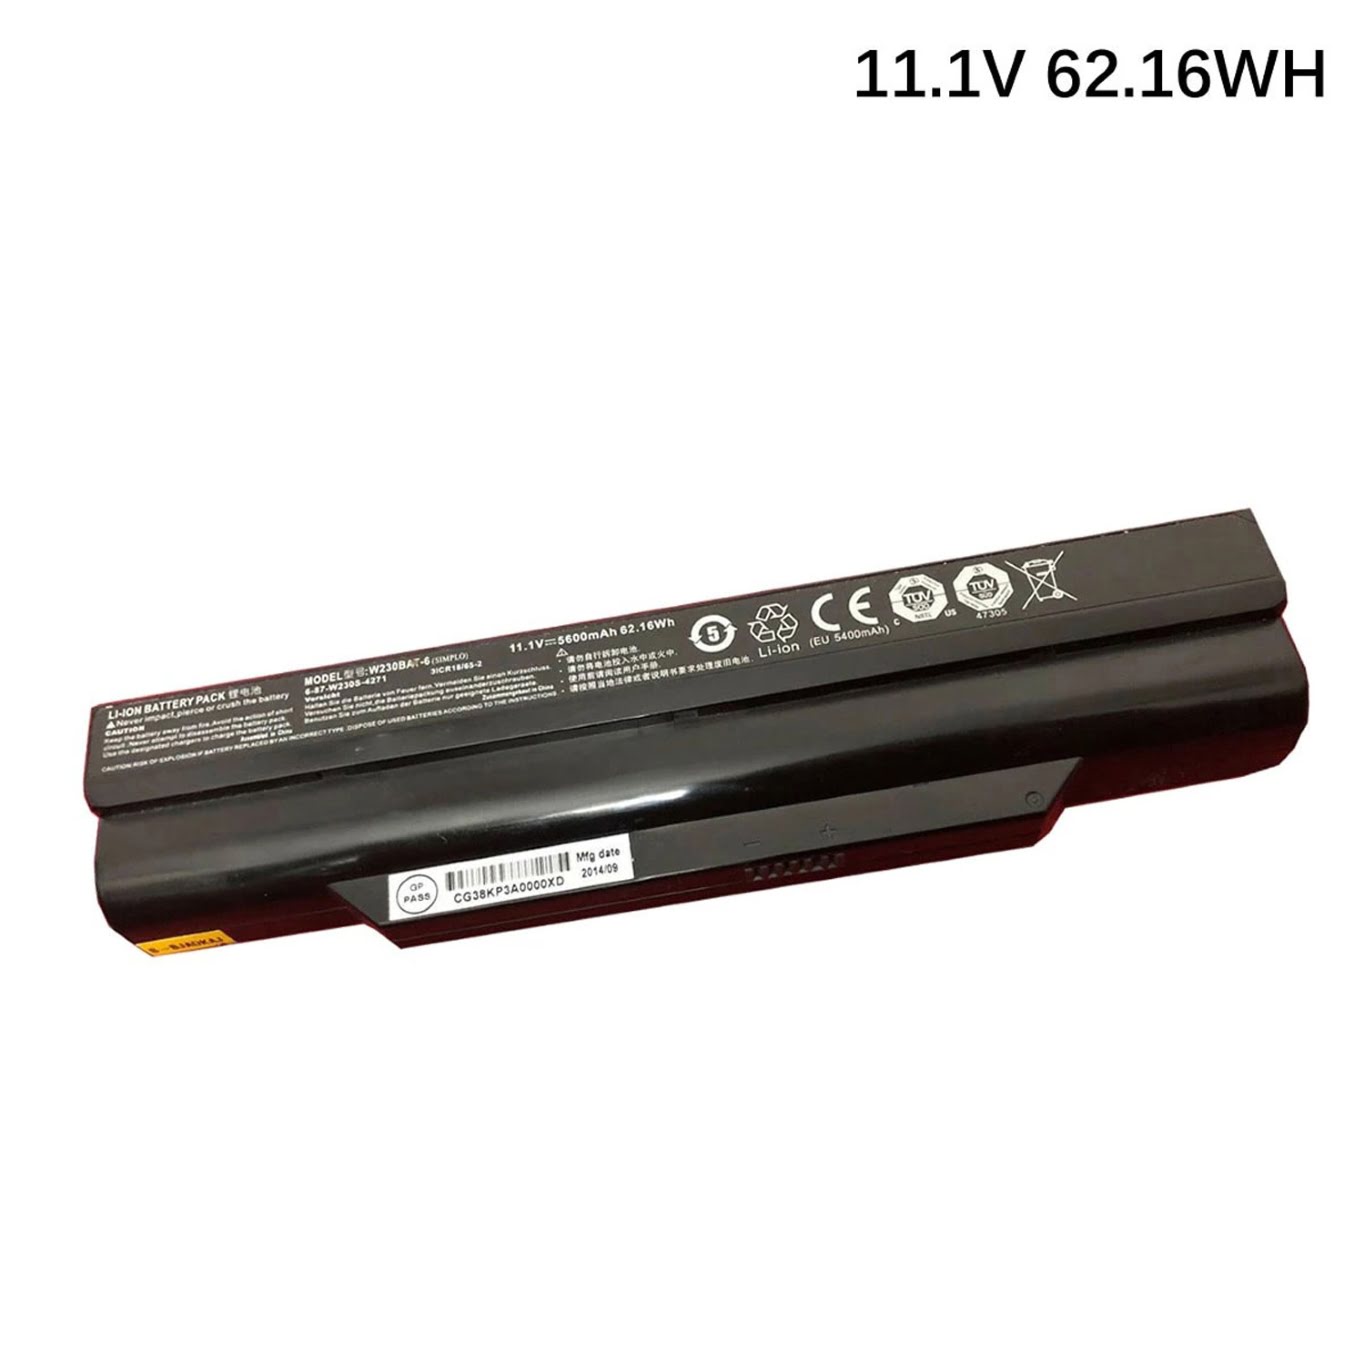 3ICR18/65/-2, 6-87-W230S-4271 replacement Laptop Battery for Clevo W230, W230SD, 6 cells, 11.1V, 5600mah / 62.16wh